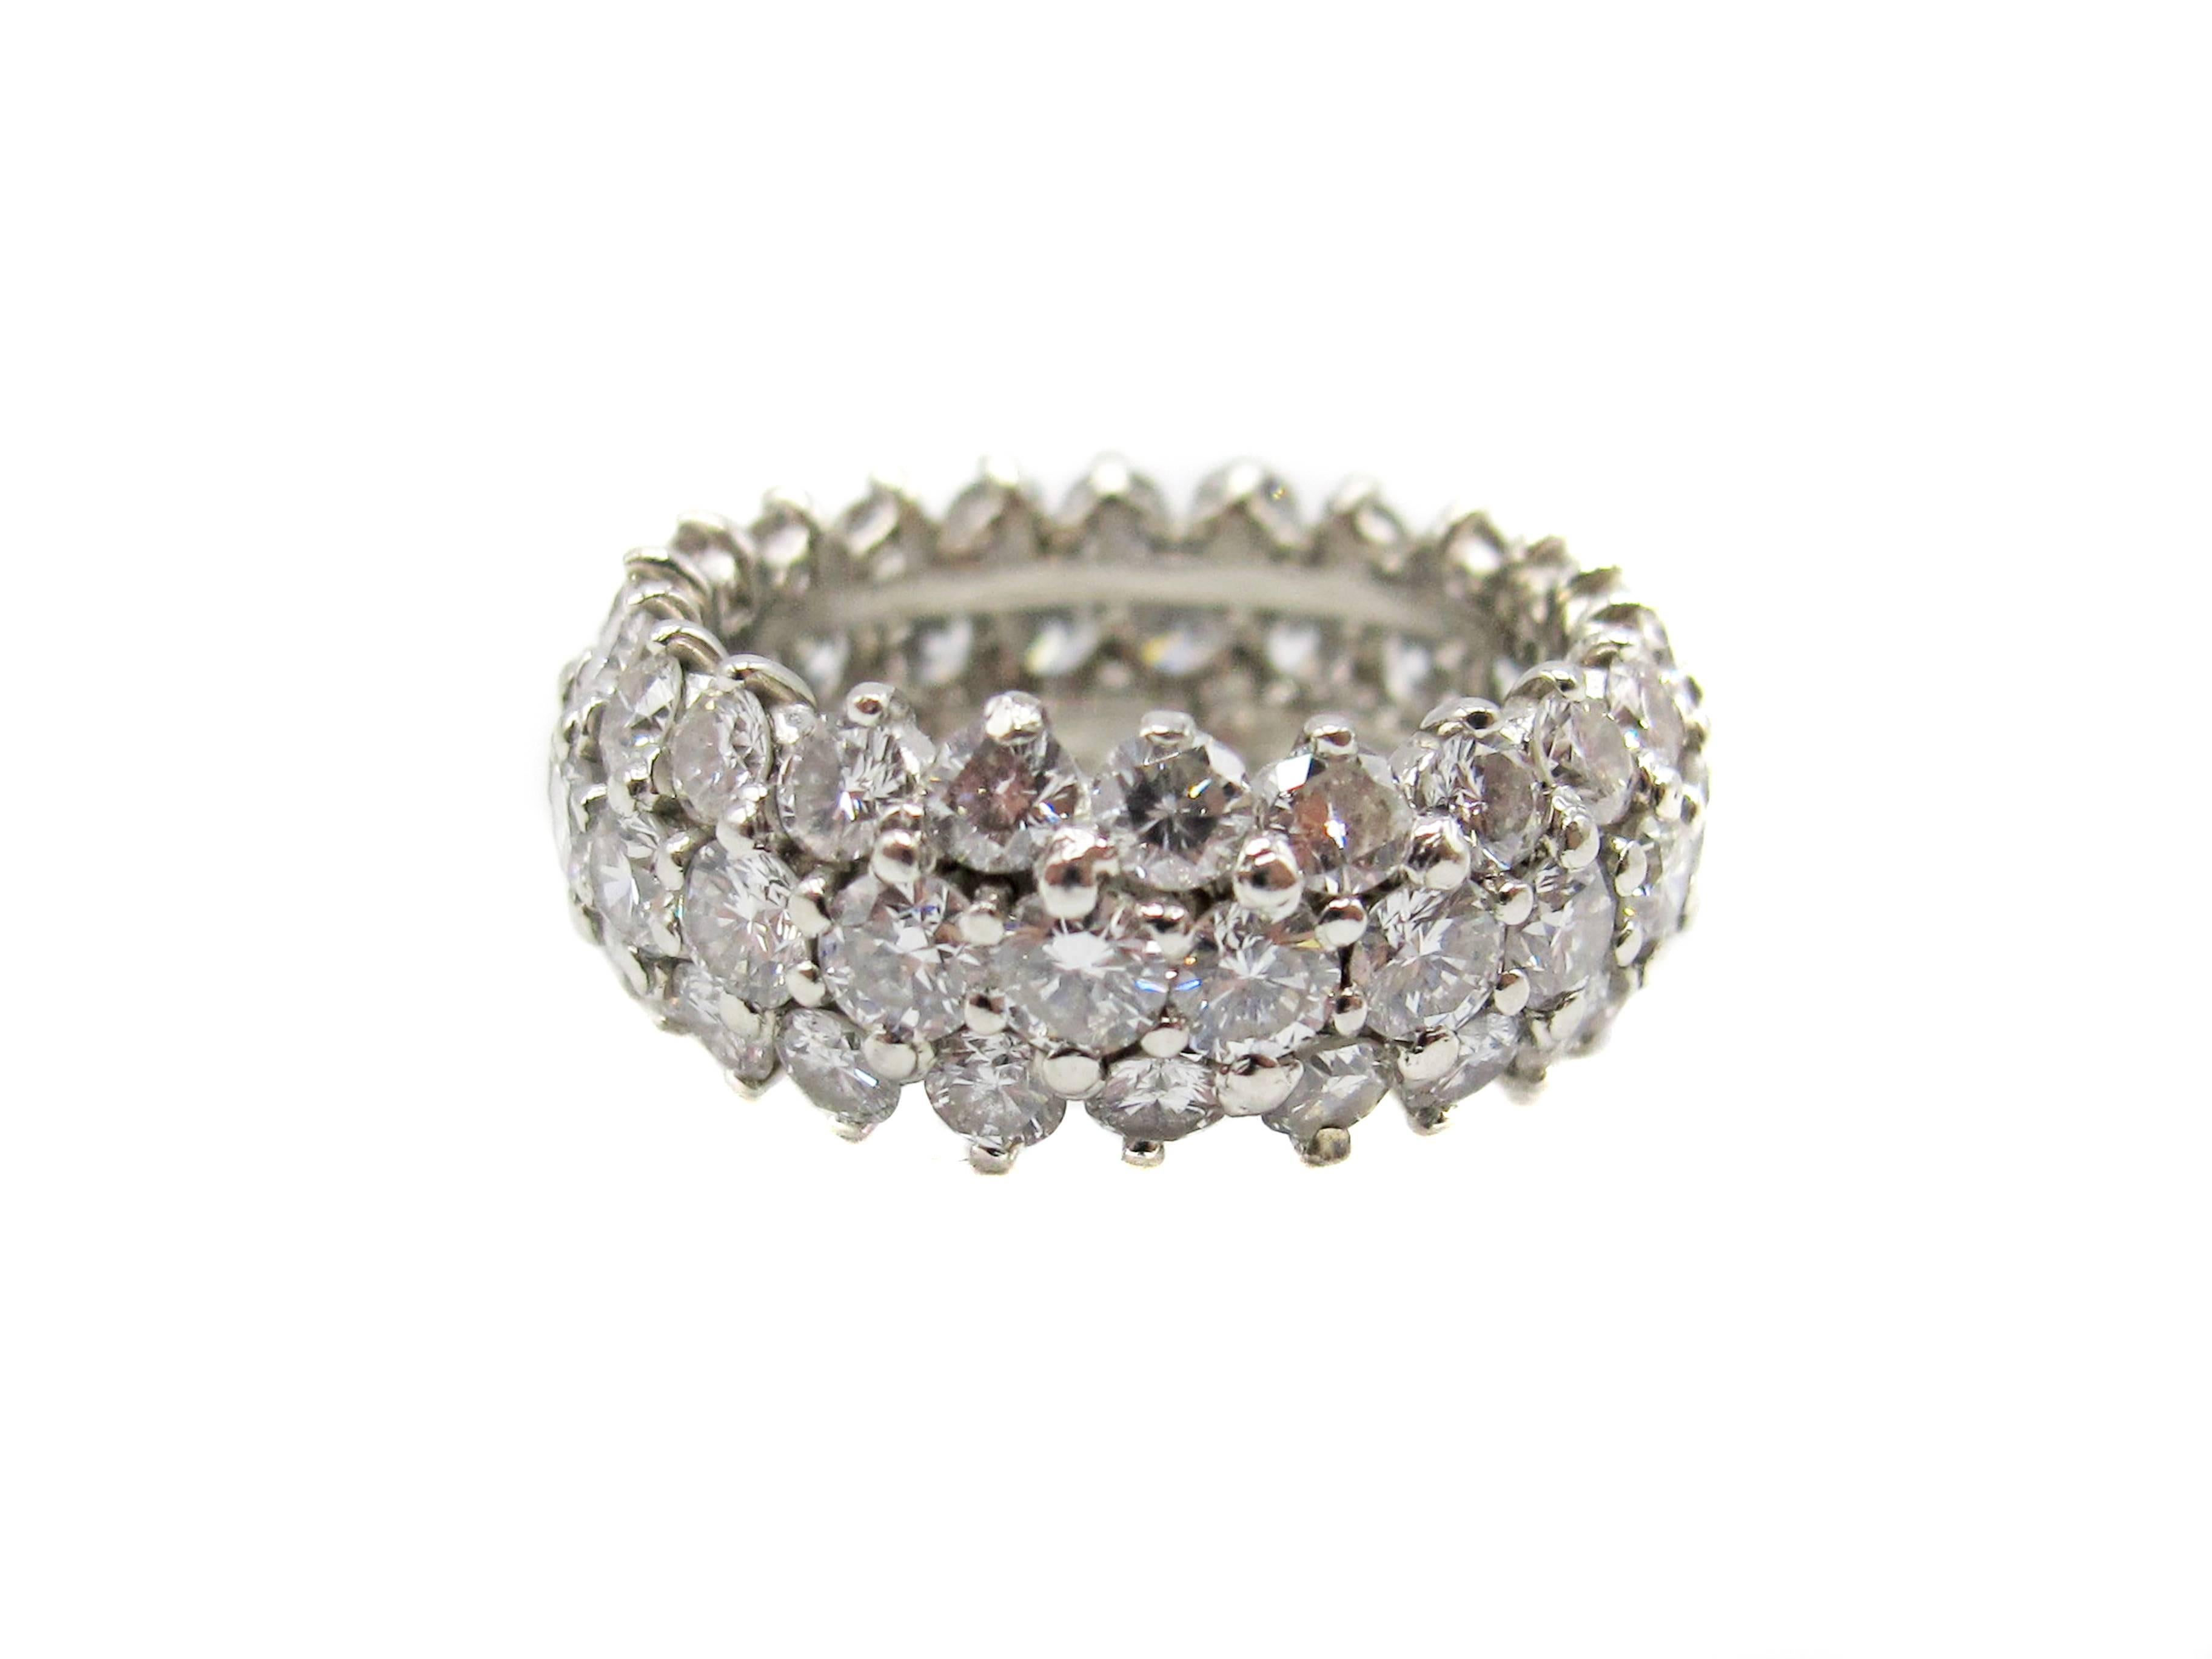 
This extremely well handcrafted platinum diamond eternity band is set with 66 bright, white and sparkly round brilliant cut diamonds. The diamonds are all perfectly matched in color, cut and clarity. The average color of the diamonds is